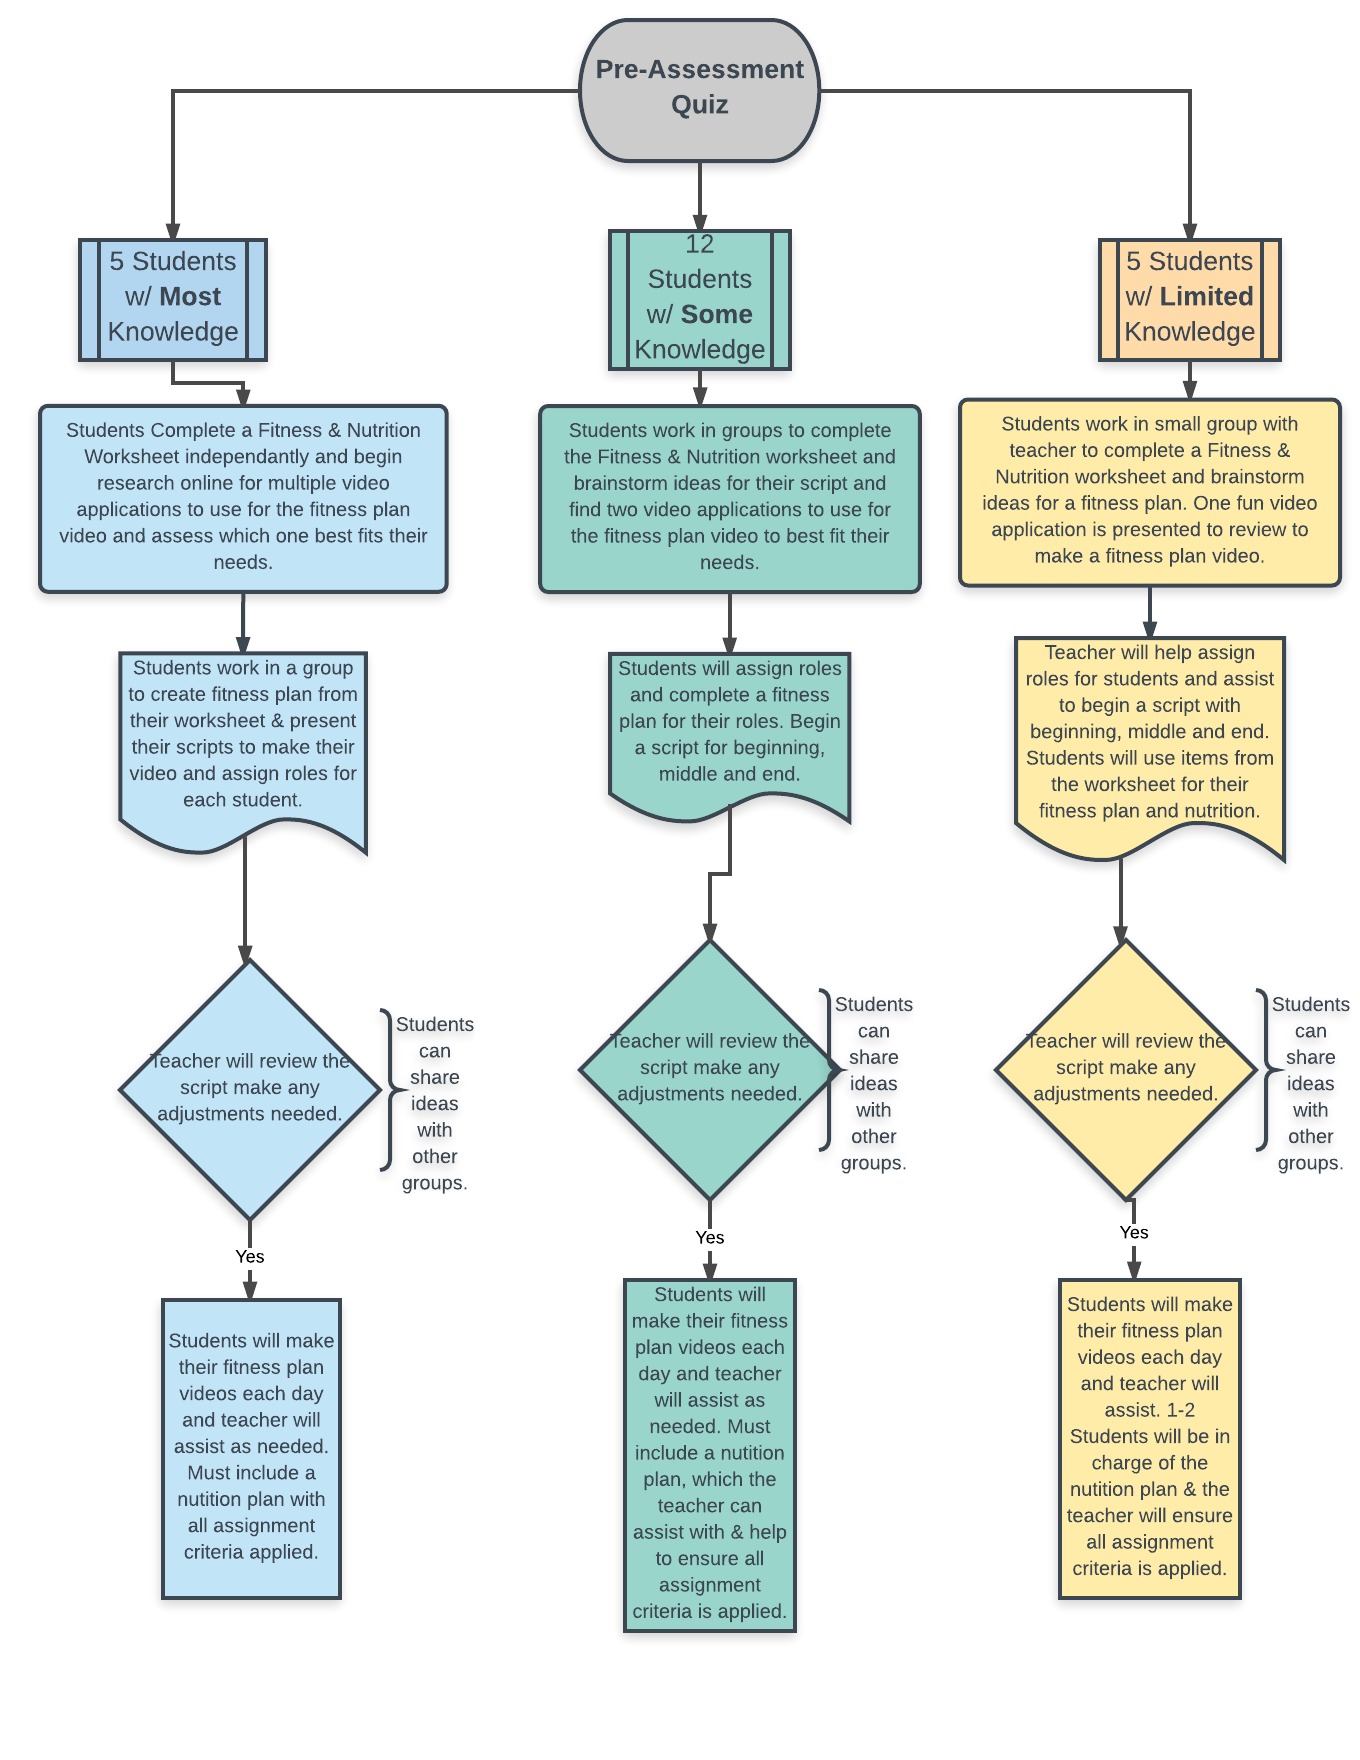 Tomlinson Differentiated Instruction Flow Chart